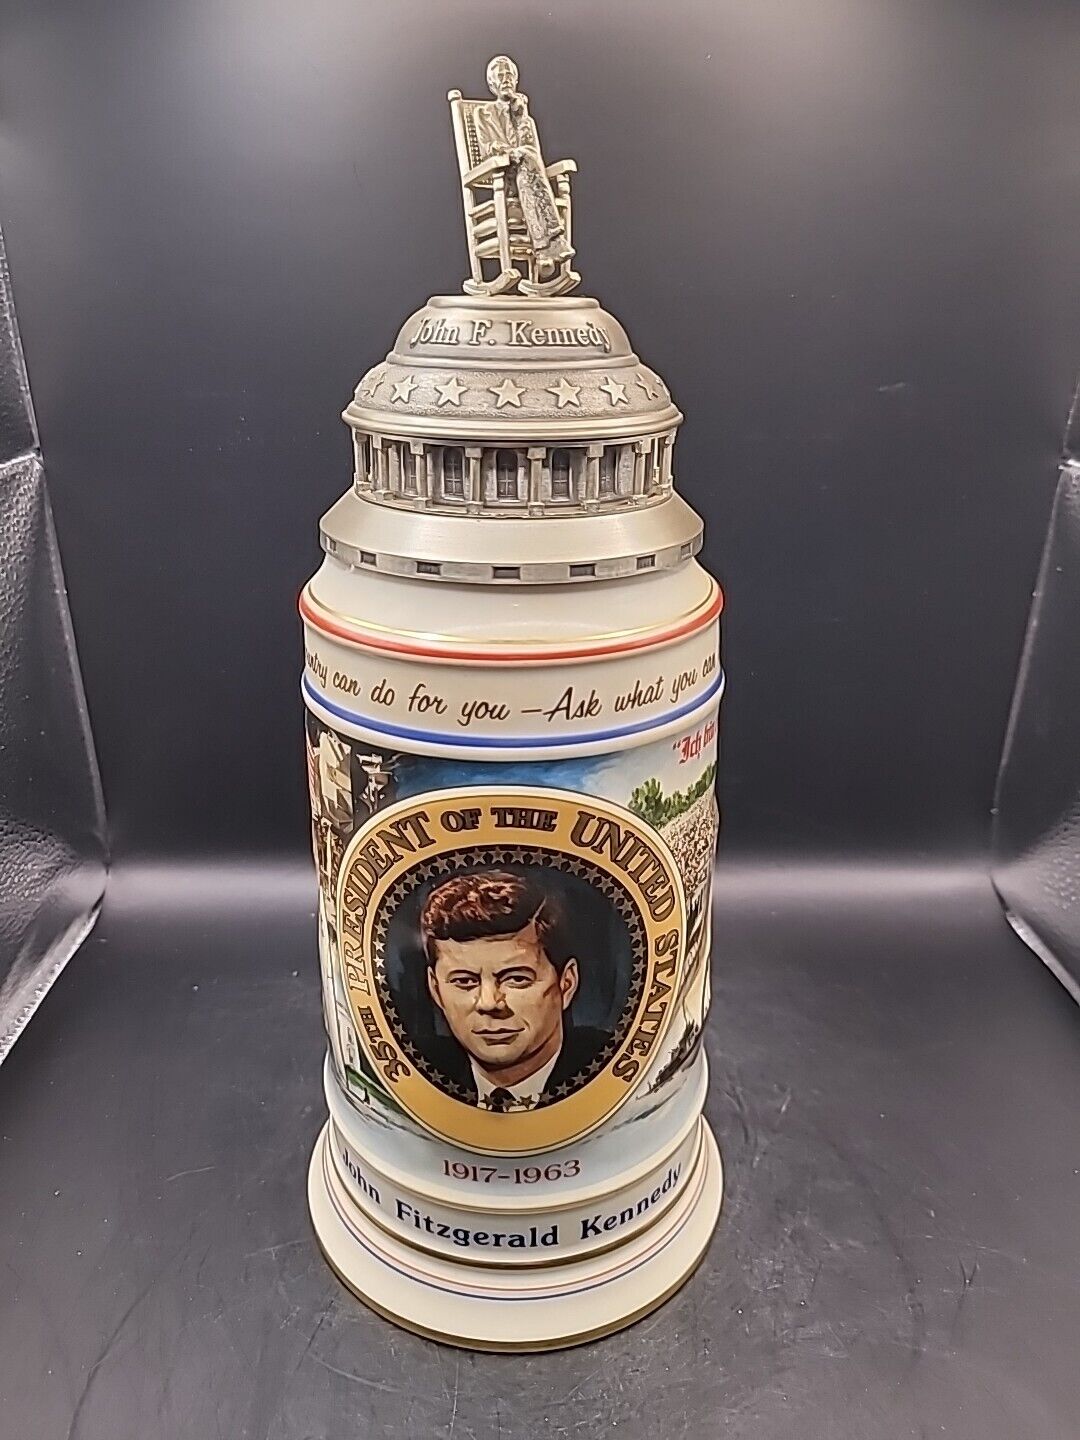 Anheuser Busch American Heritage Collection John Fitzgerald Kennedy Stein